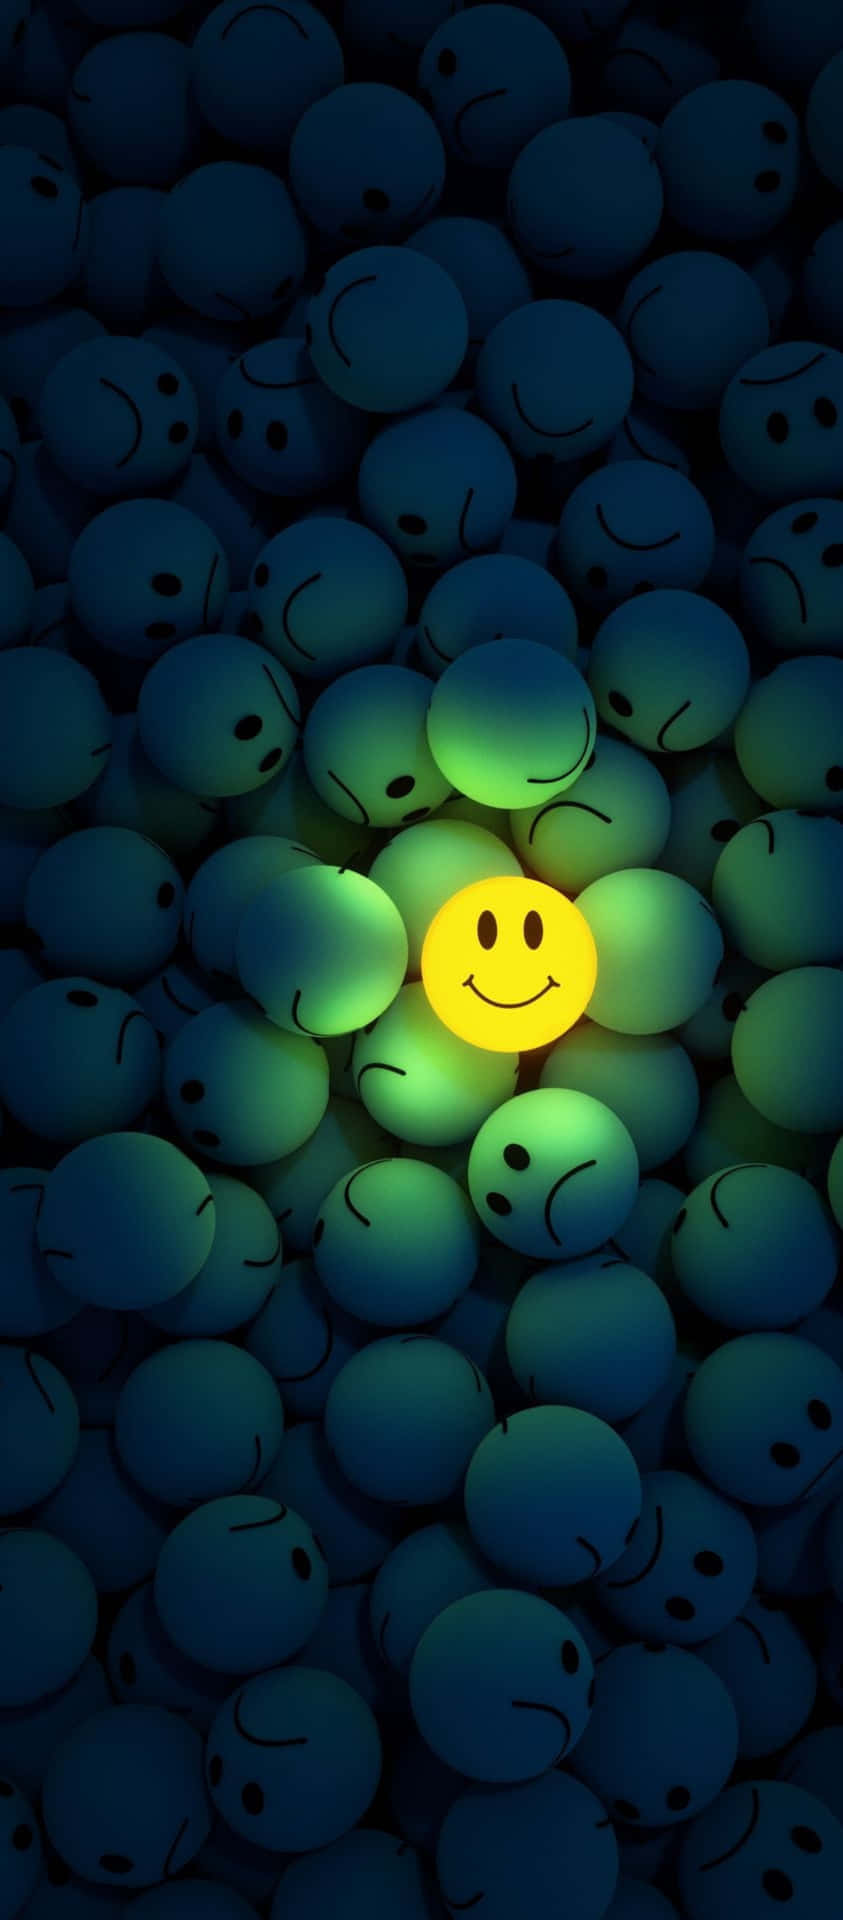 A Yellow Smiley Face In The Middle Of A Group Of Blue Balls Wallpaper